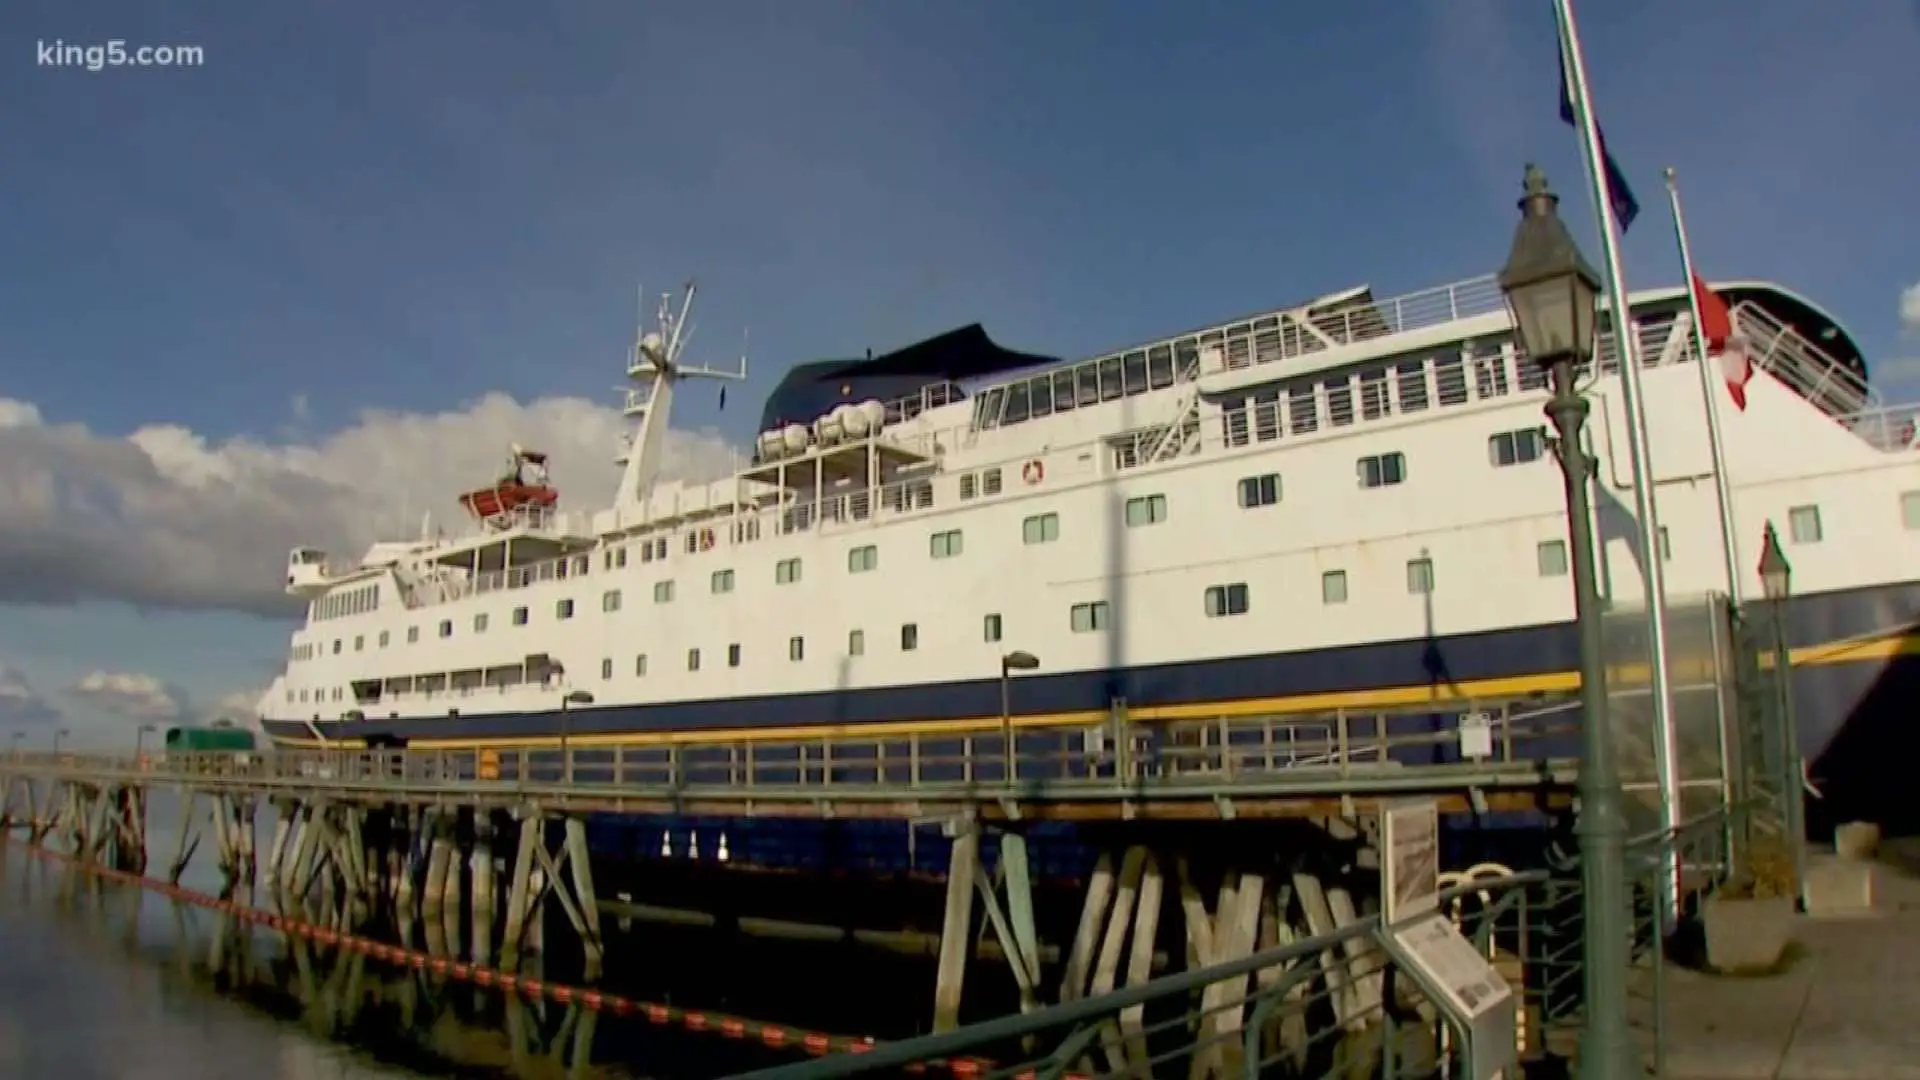 Ferry workers rally to save Alaska